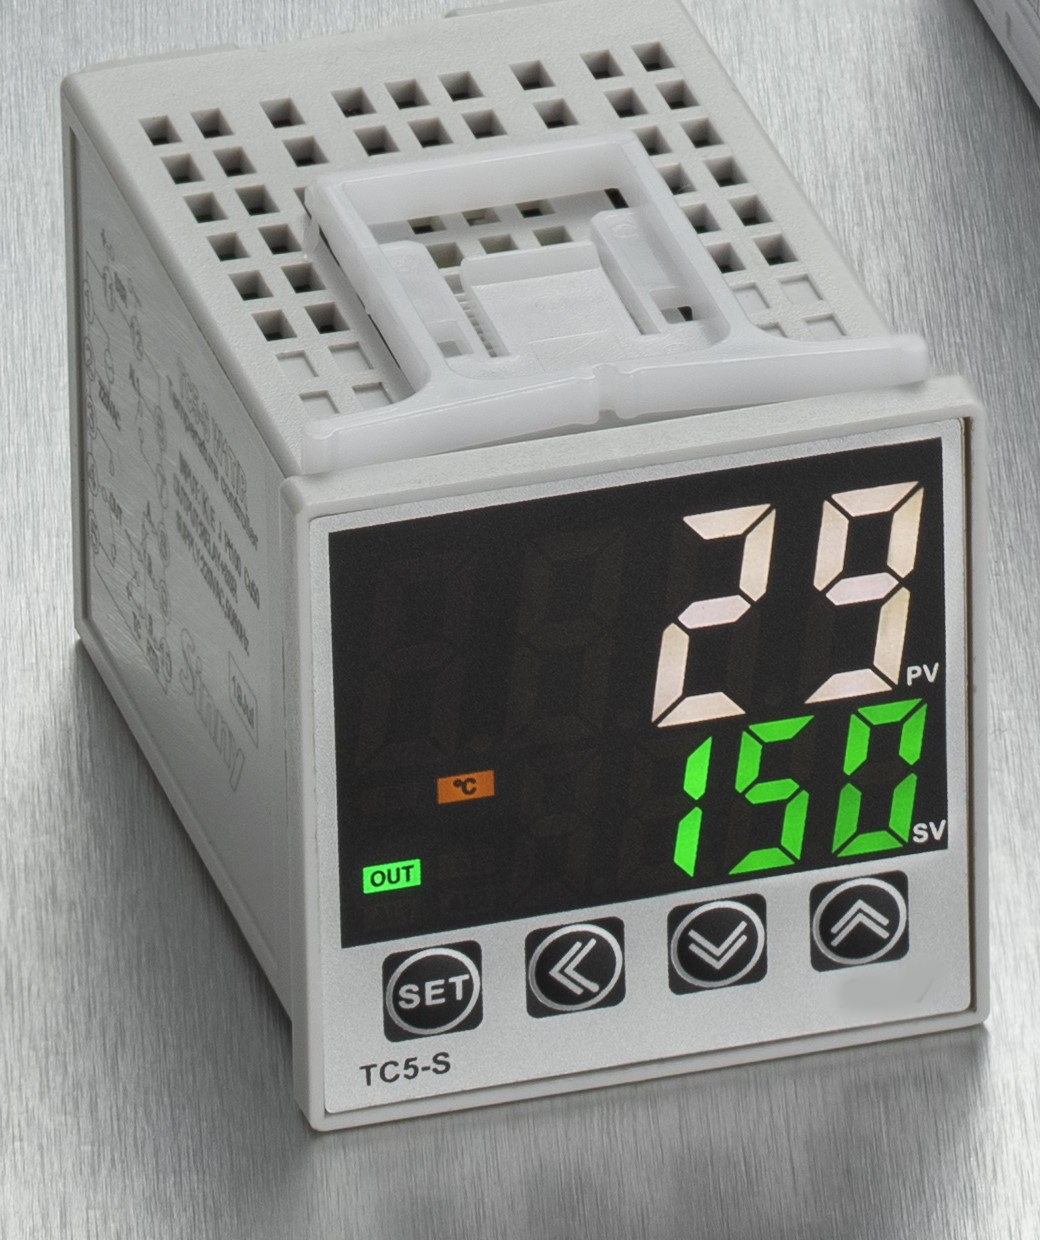 TC5-S-S-2-G-2 PID Controller, 100-240VAC with 2 3 Amp Relay Alarms, Multirange Type K,E,J,N,T,S,R,B Thermocouple, Linear Current/Voltage and PT100/Cu20 RTD Input, Pt100 or Cu20, 48x48mm,12VDC Output